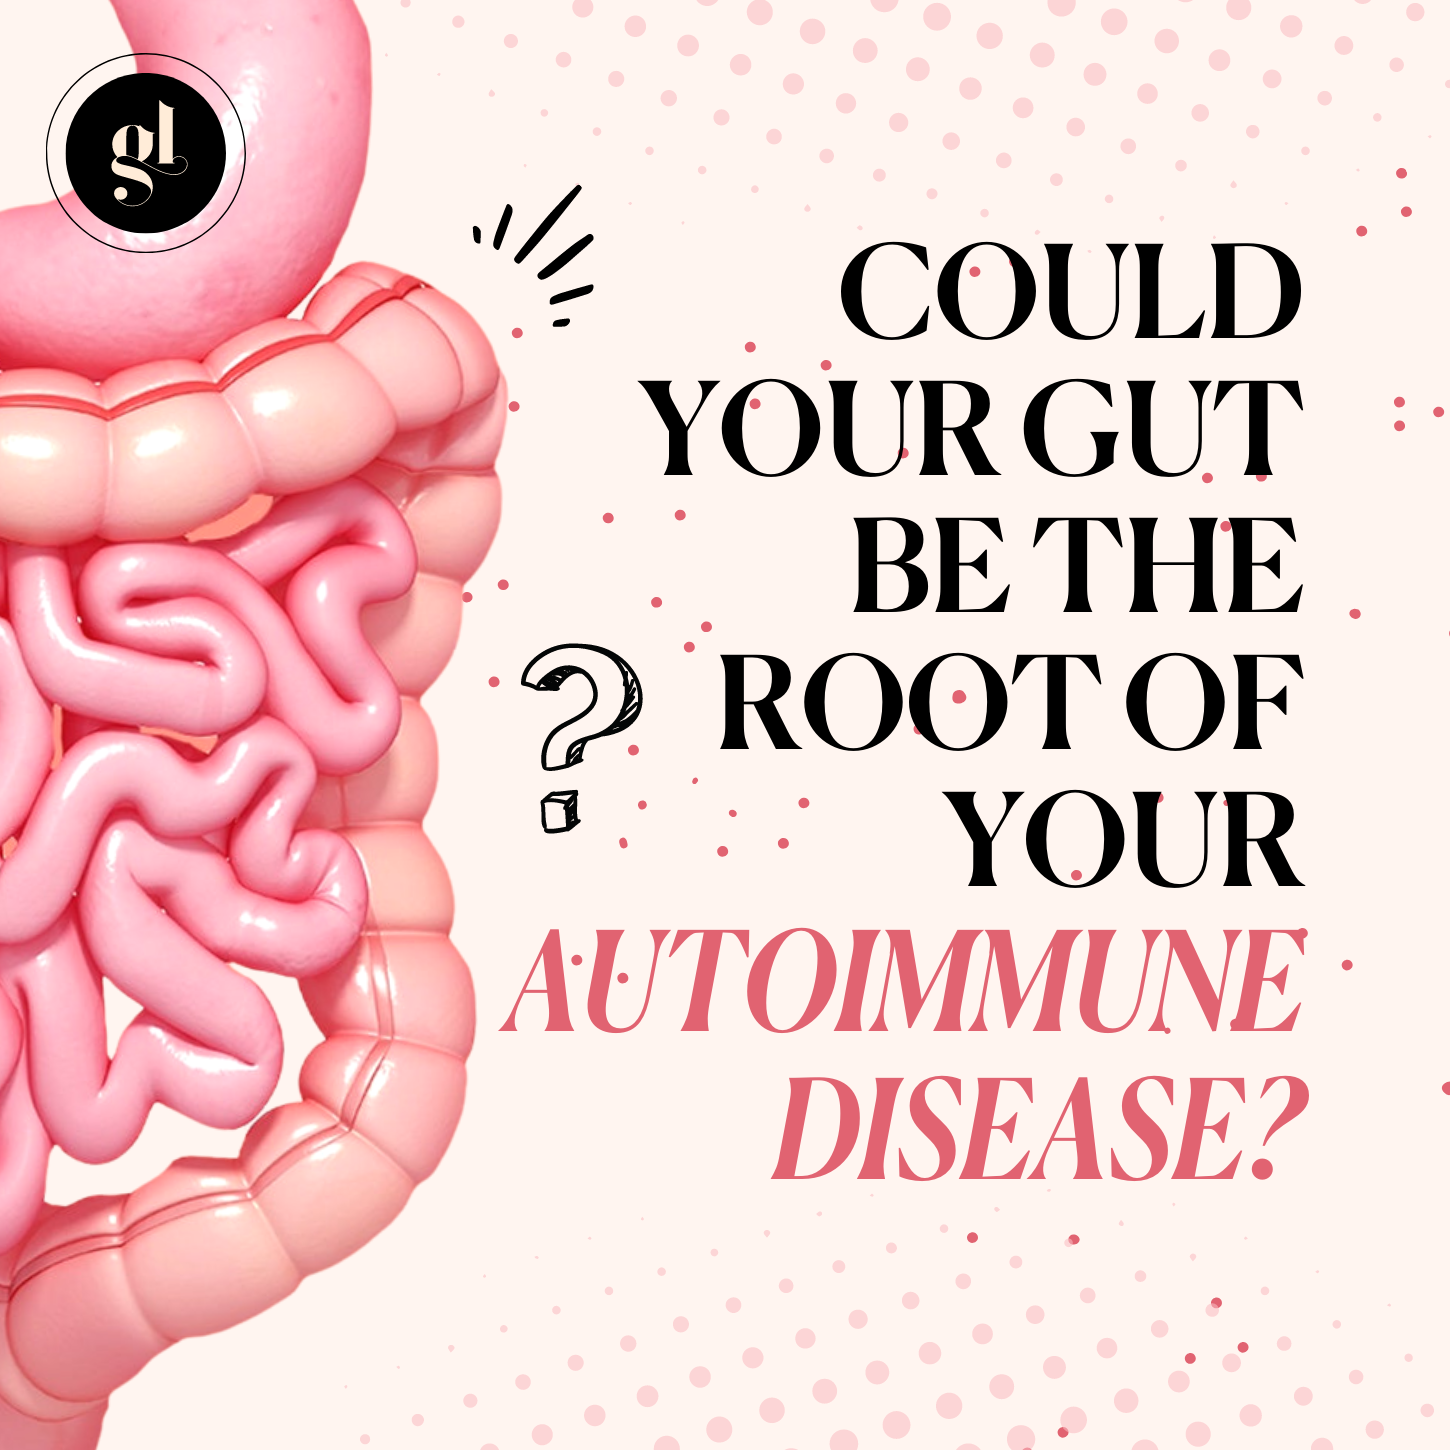 Could Your Gut Be The Root Of Your Autoimmune Disease?